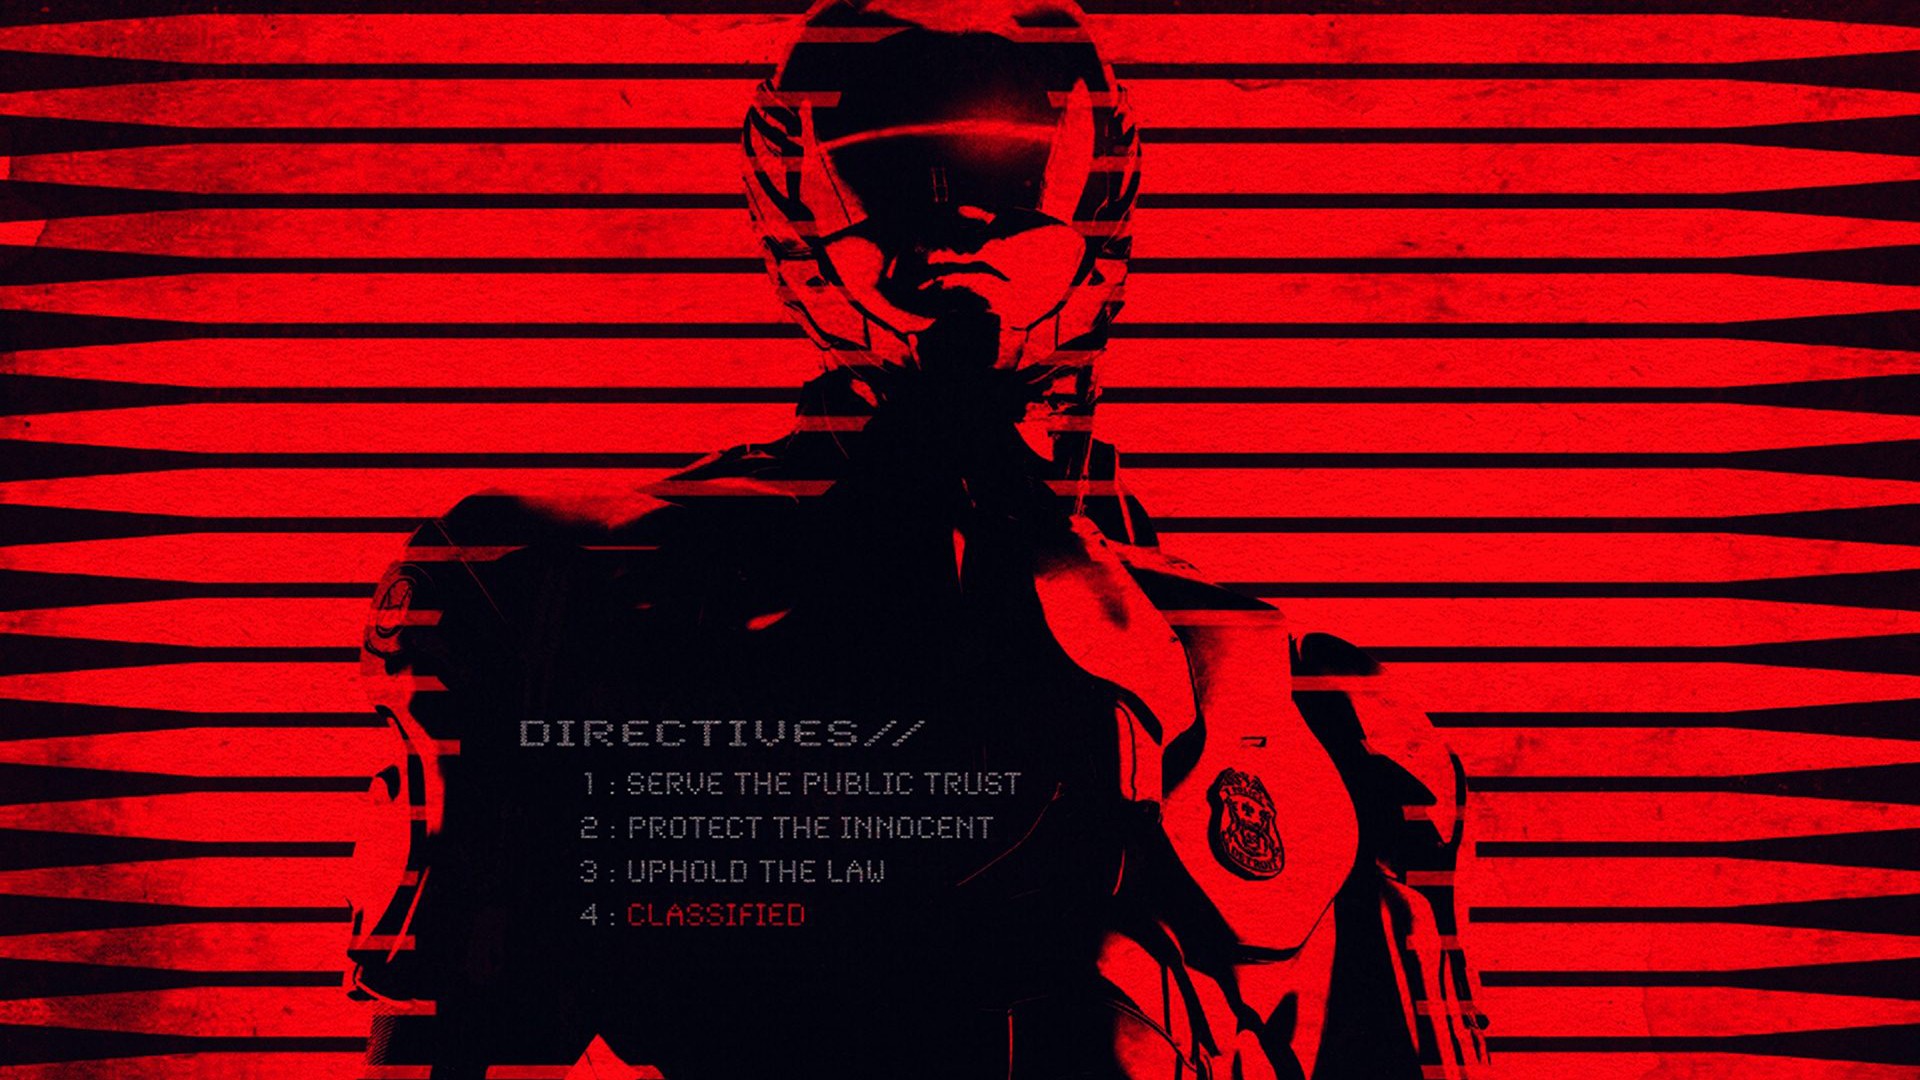 General 1920x1080 RoboCop robocop 2 police red background red movie characters